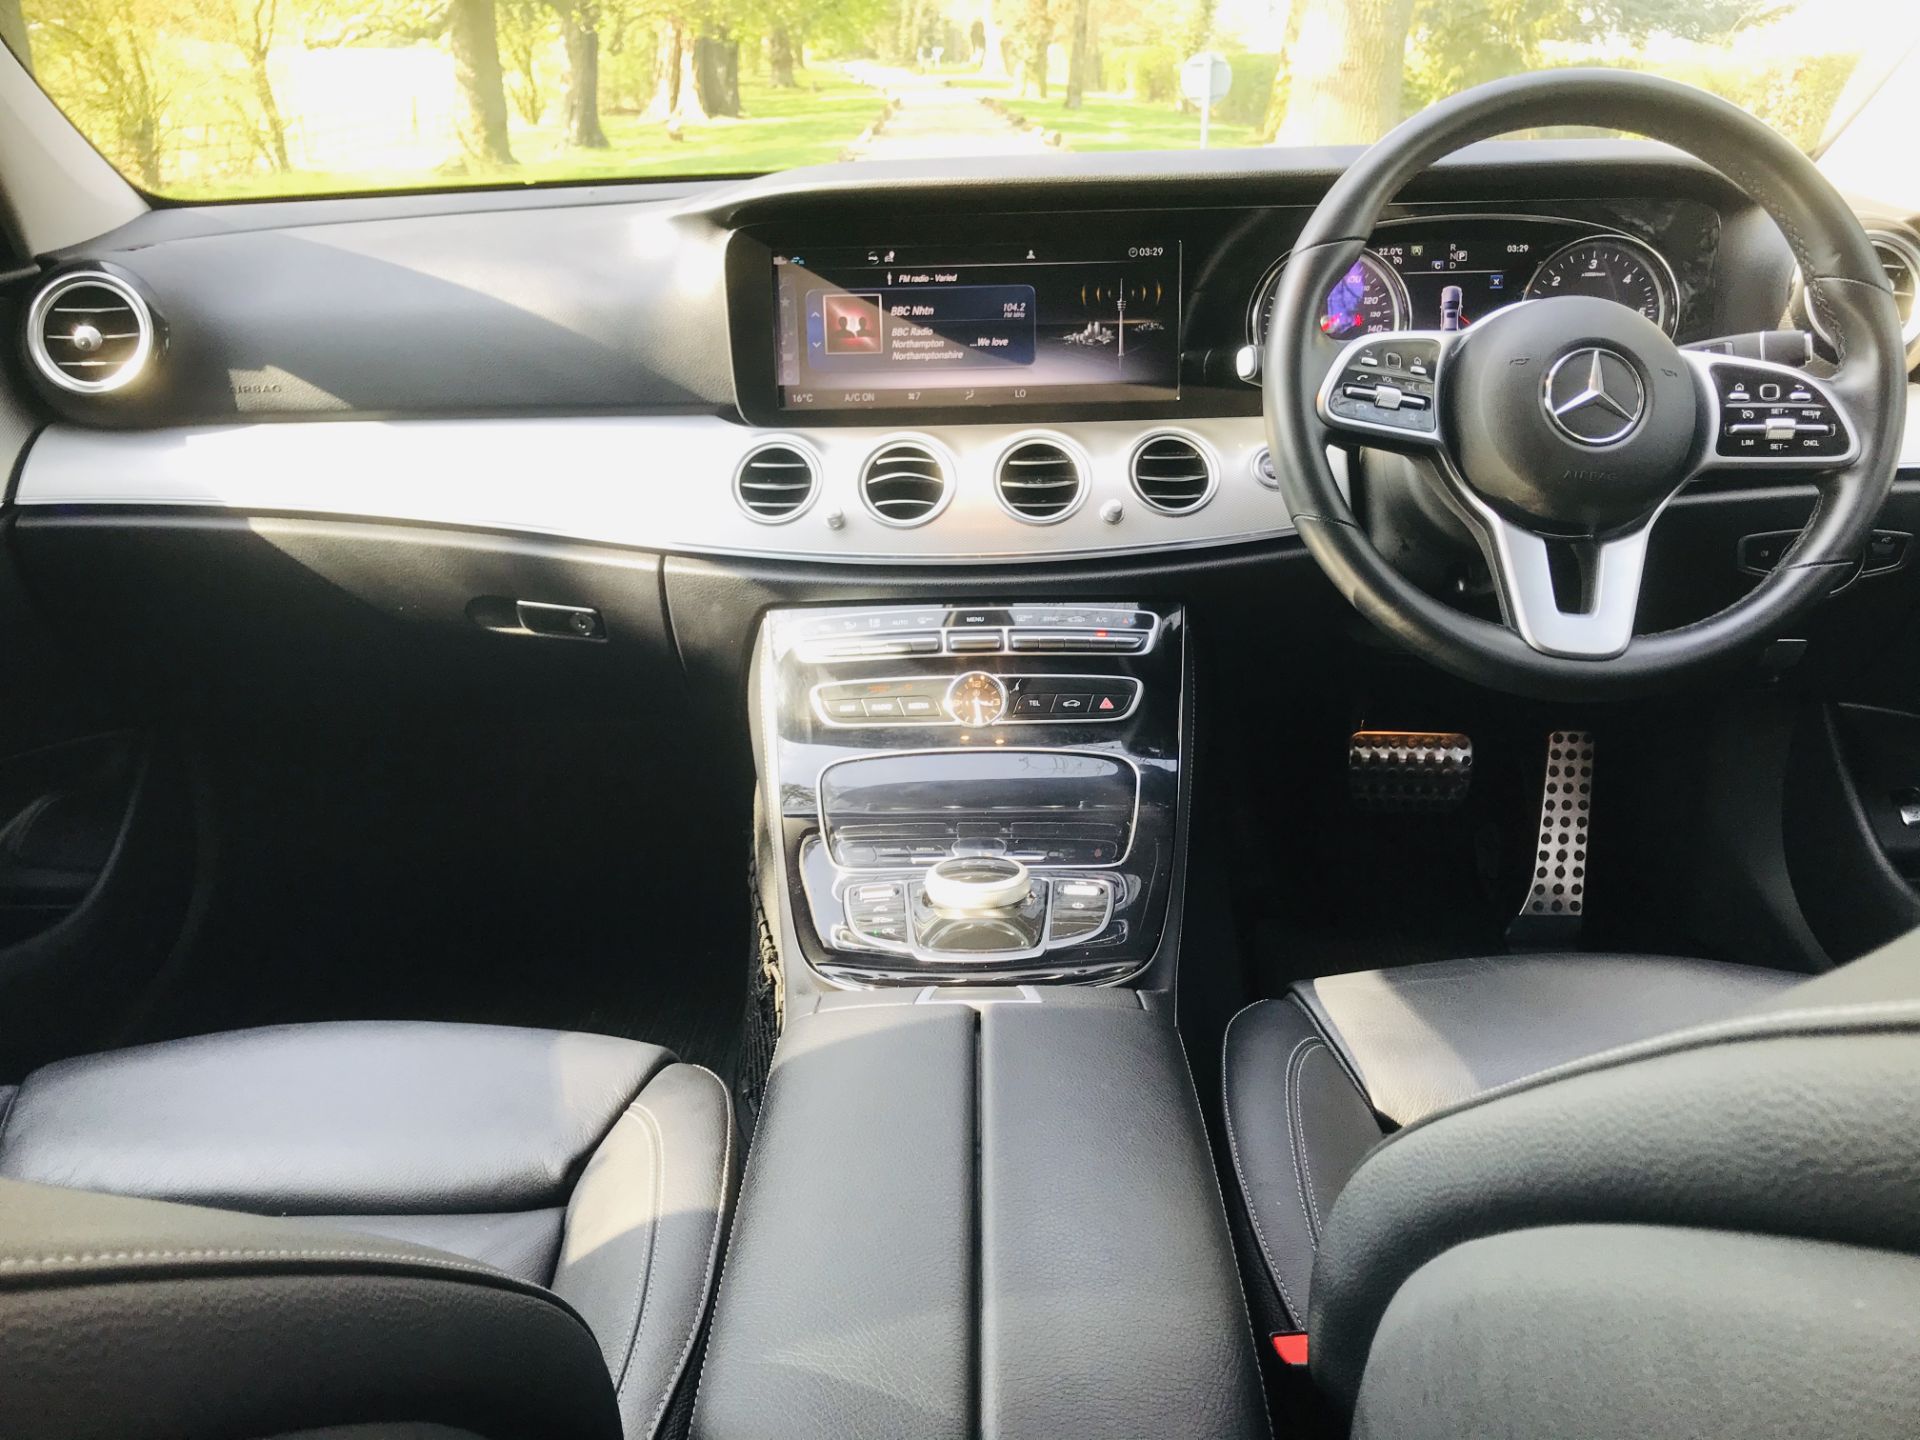 On Sale MERCEDES E220d "SPECIAL EQUIPMENT" 9G TRONIC (2019 MODEL) 1 OWNER - SAT NAV - LEATHER - WOW! - Image 11 of 26